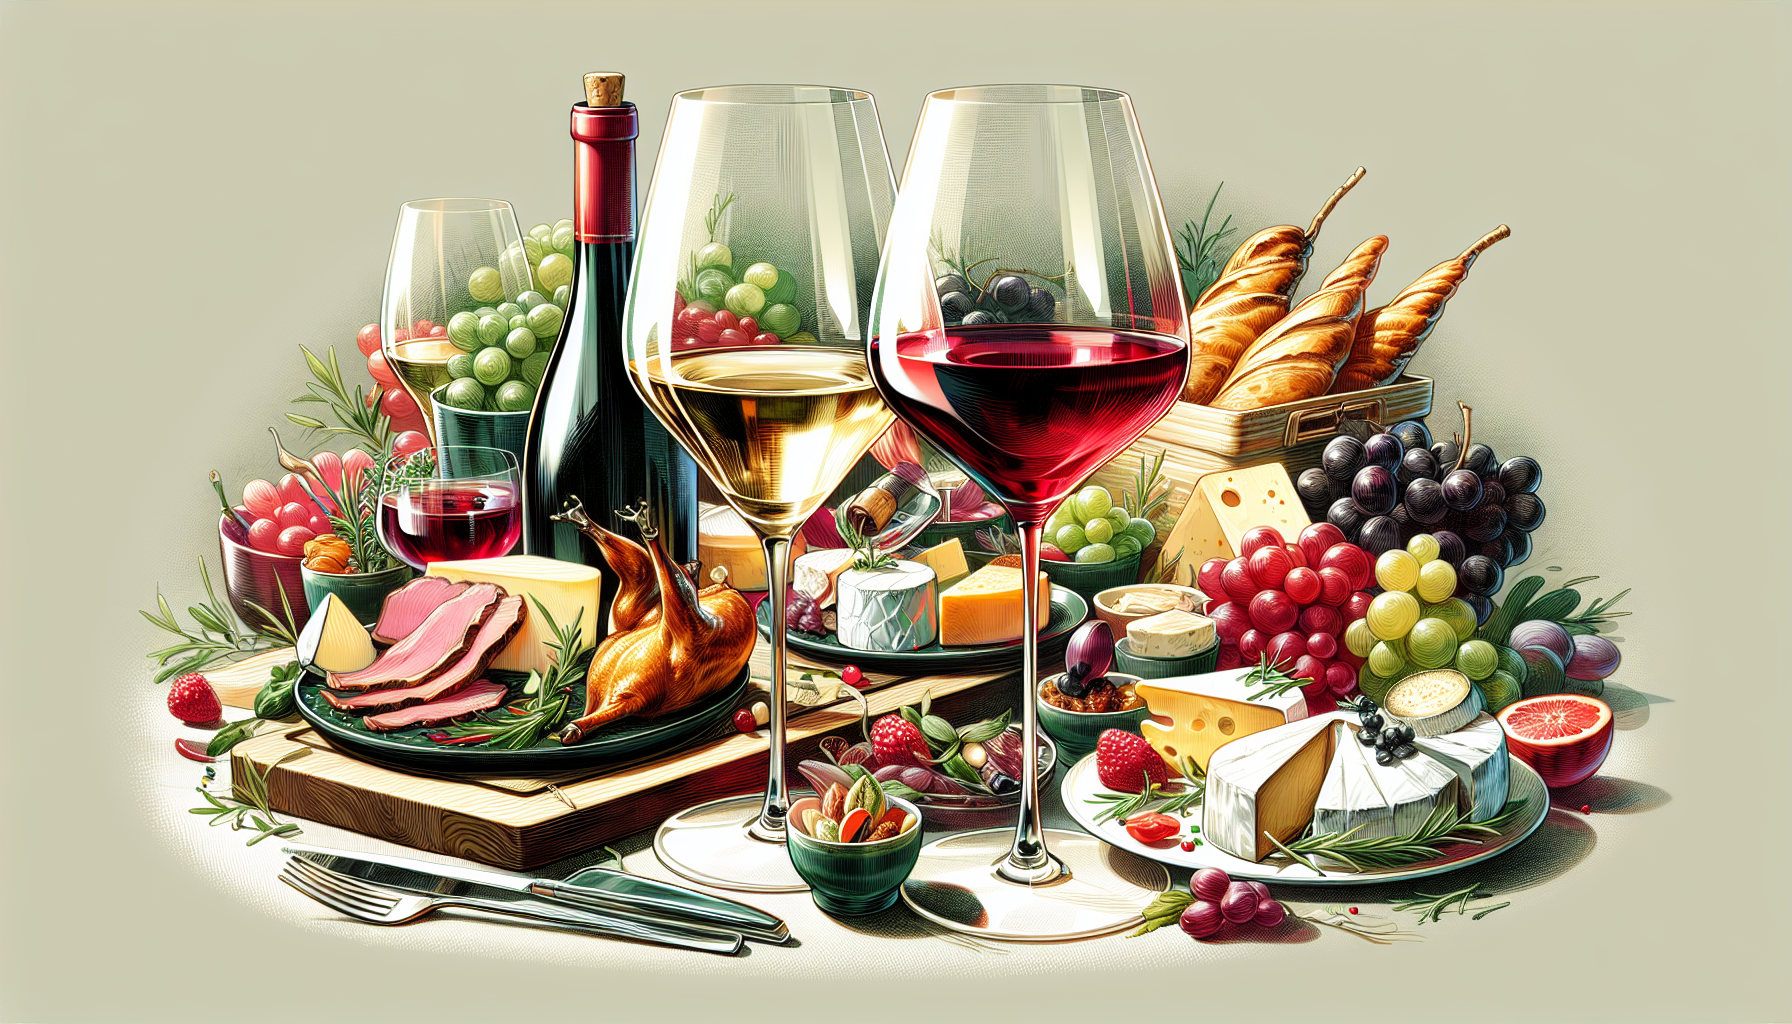 Illustration of a beautifully arranged wine and food pairing